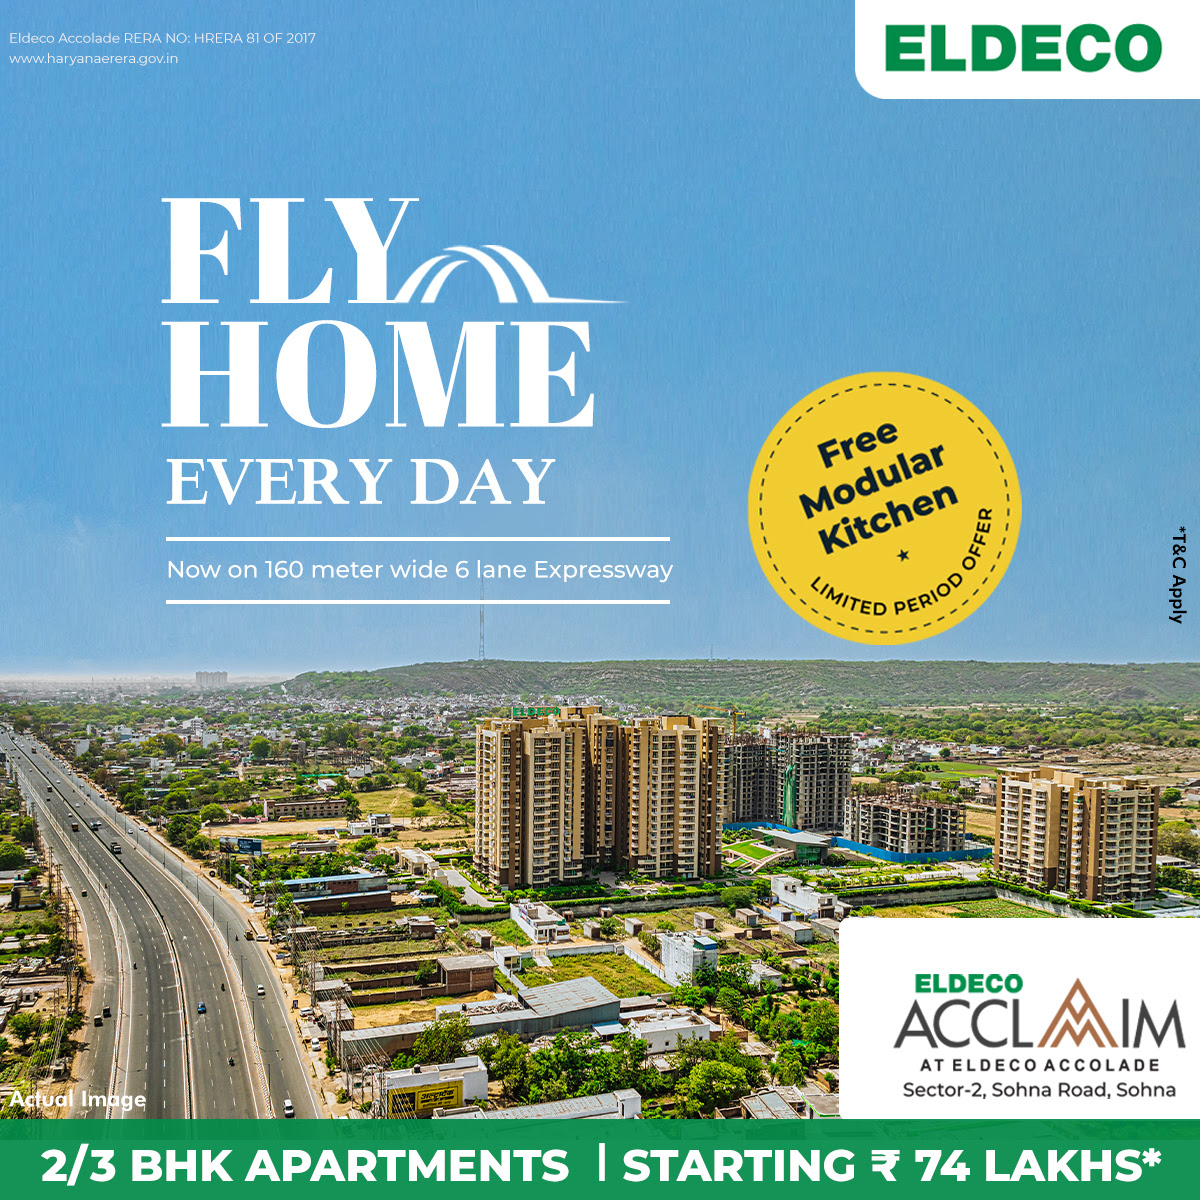 Book 2 and 3 BHK apartments price starting Rs 74 Lac at Eldeco Acclaim in Sohna, Gurgaon Update